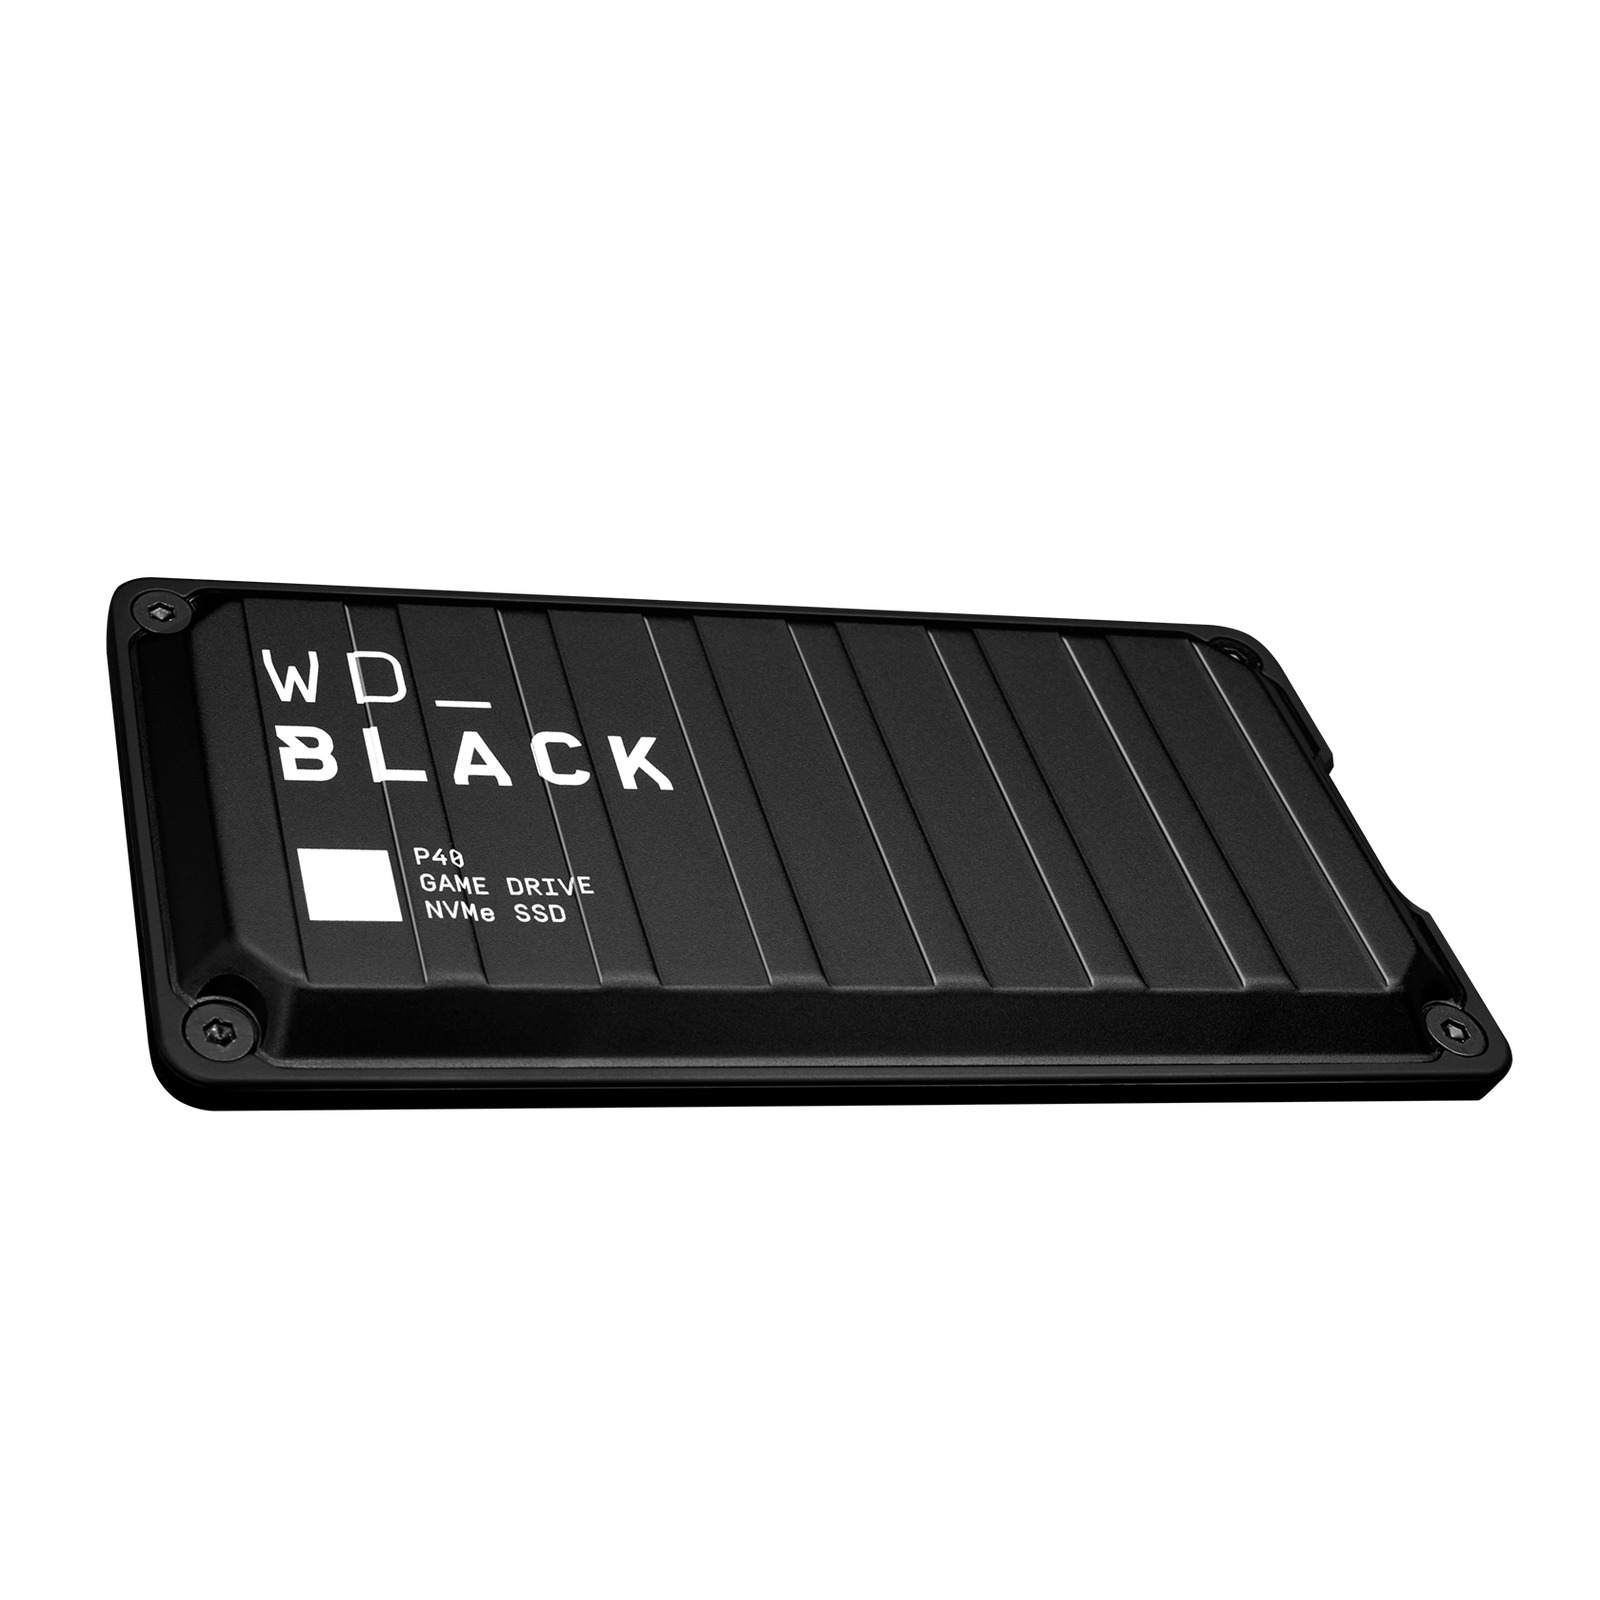 WD_BLACK 500GB P40 Game Drive SSD, External Solid State Drive WDBAWY5000ABK-WESN